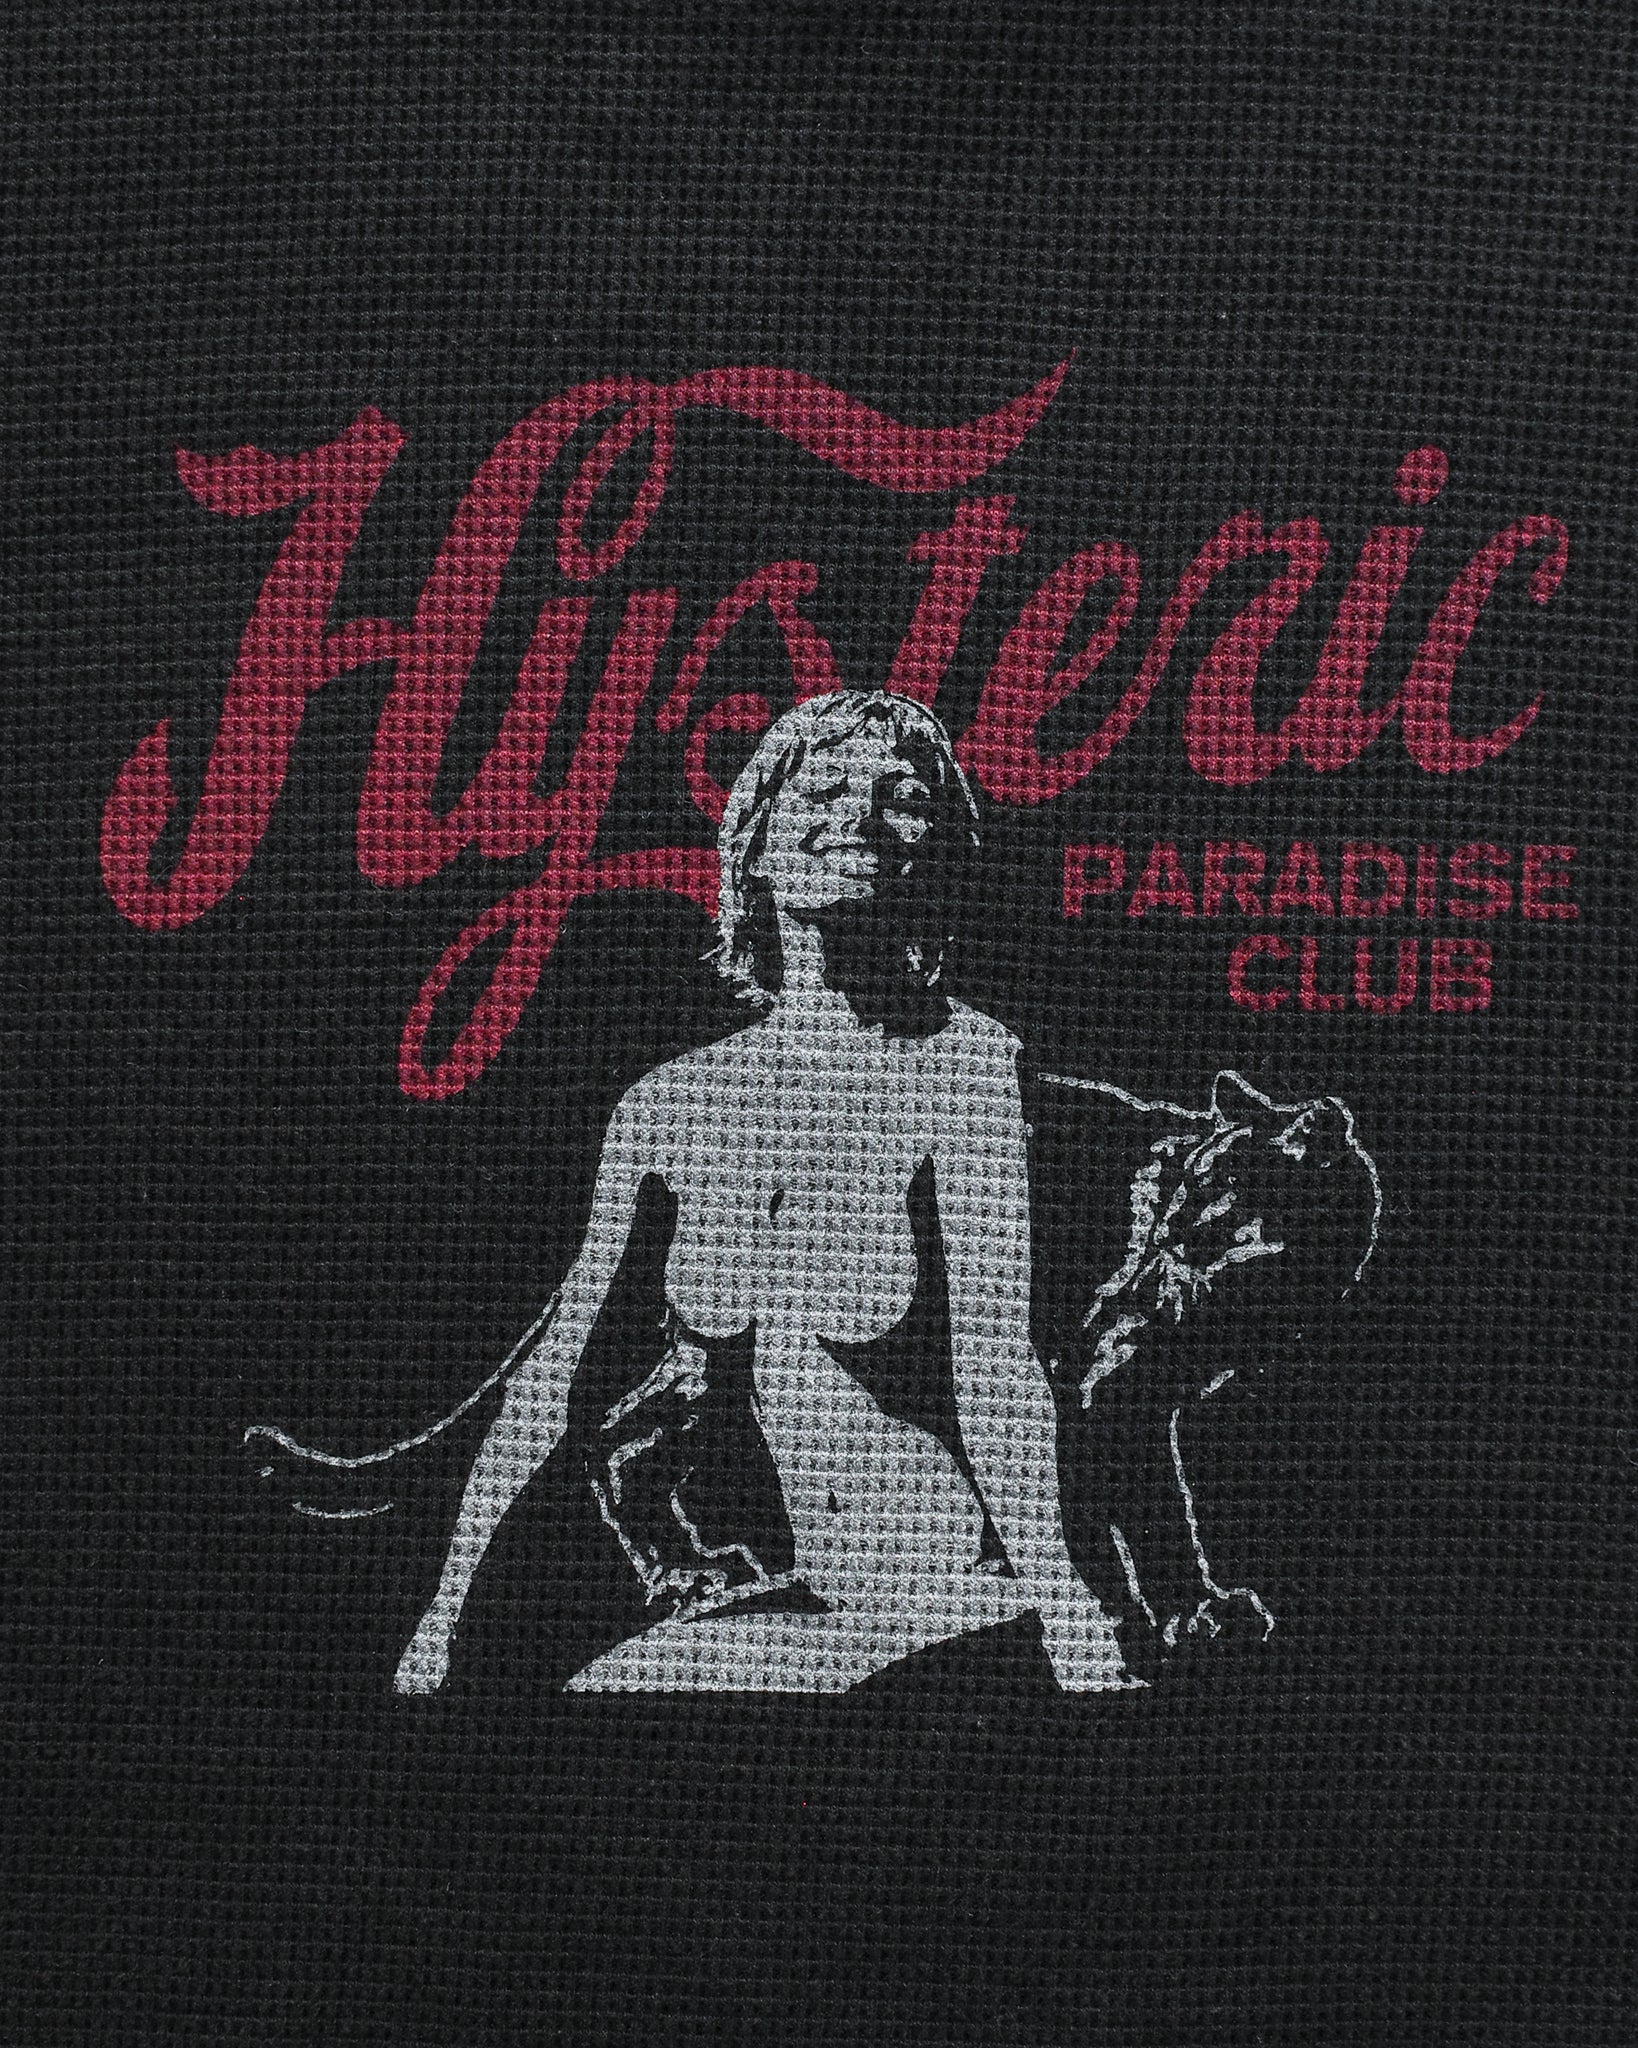 Hysteric Glamour "paradise club" Thermal Long Sleeve